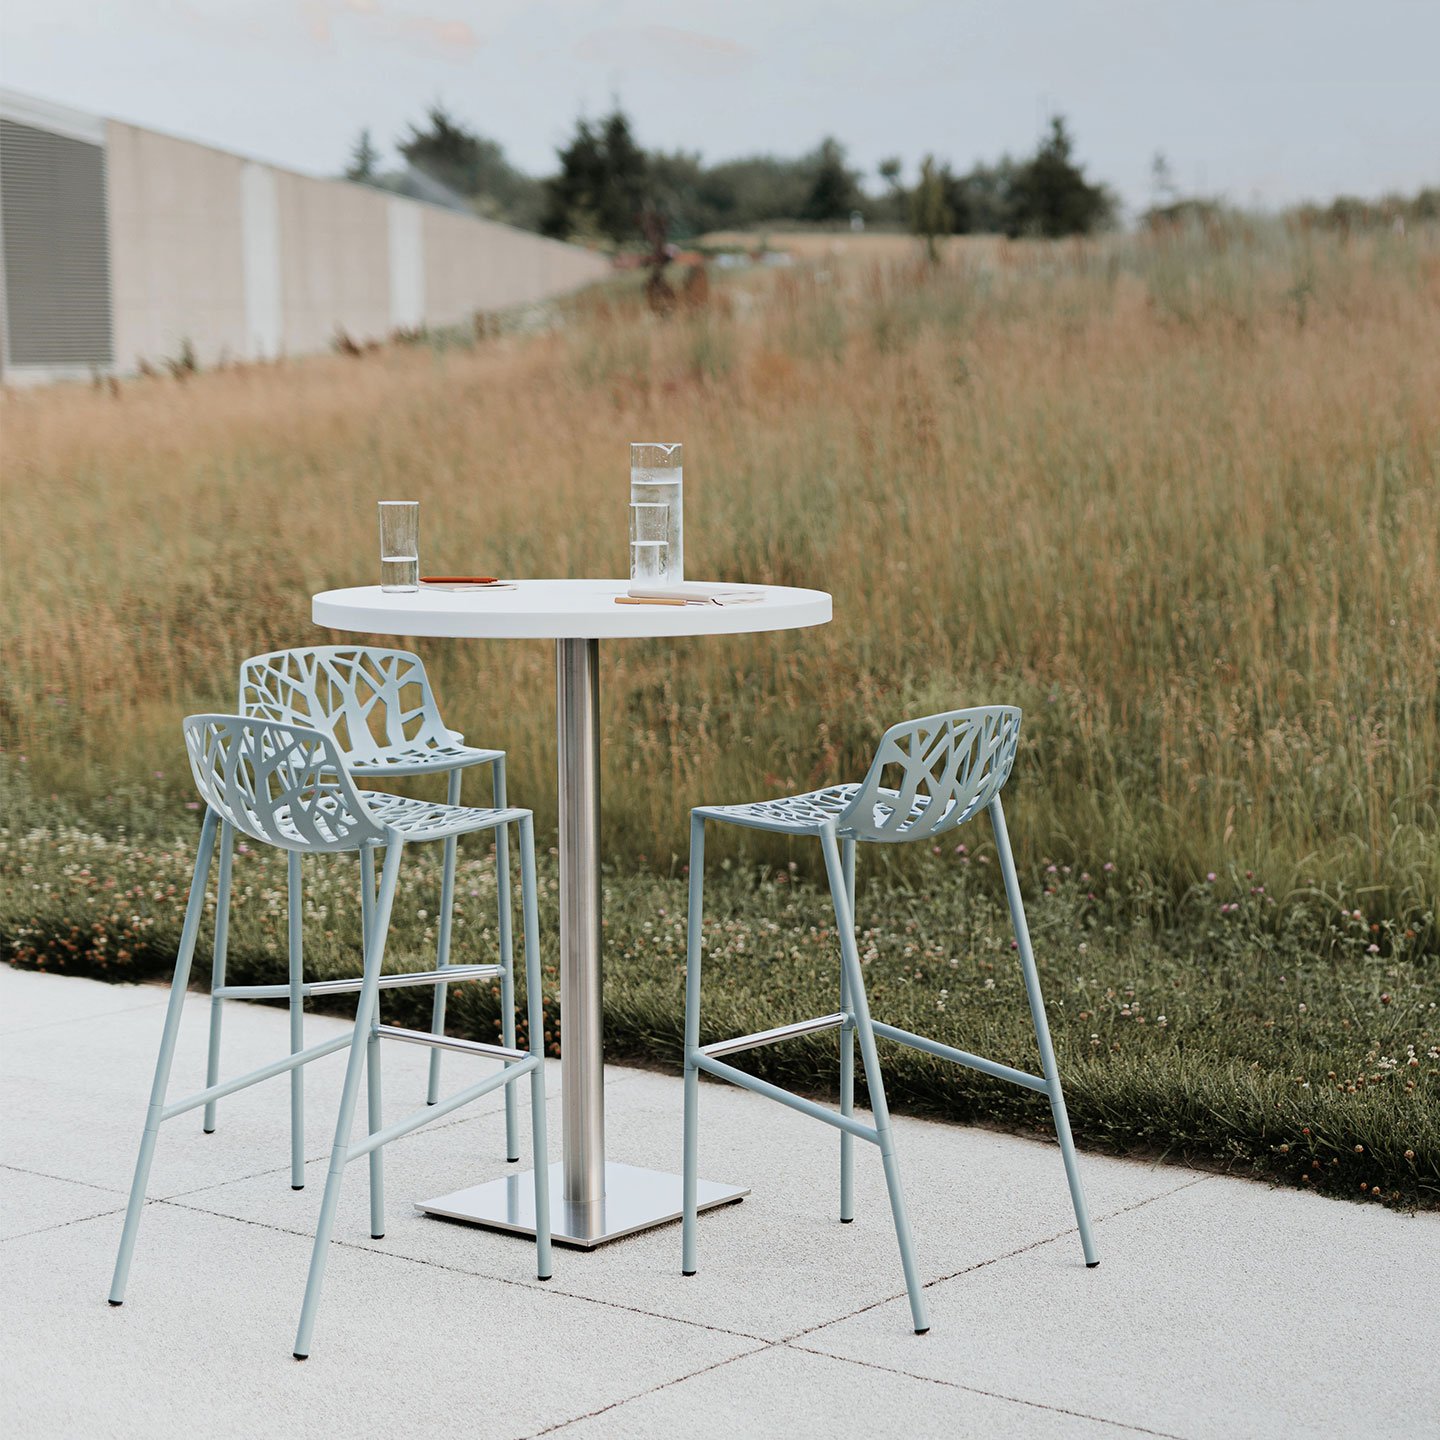 Haworth Janus Cafe Table in white laminate with circular top in outdoor patio area with 3 high chairs